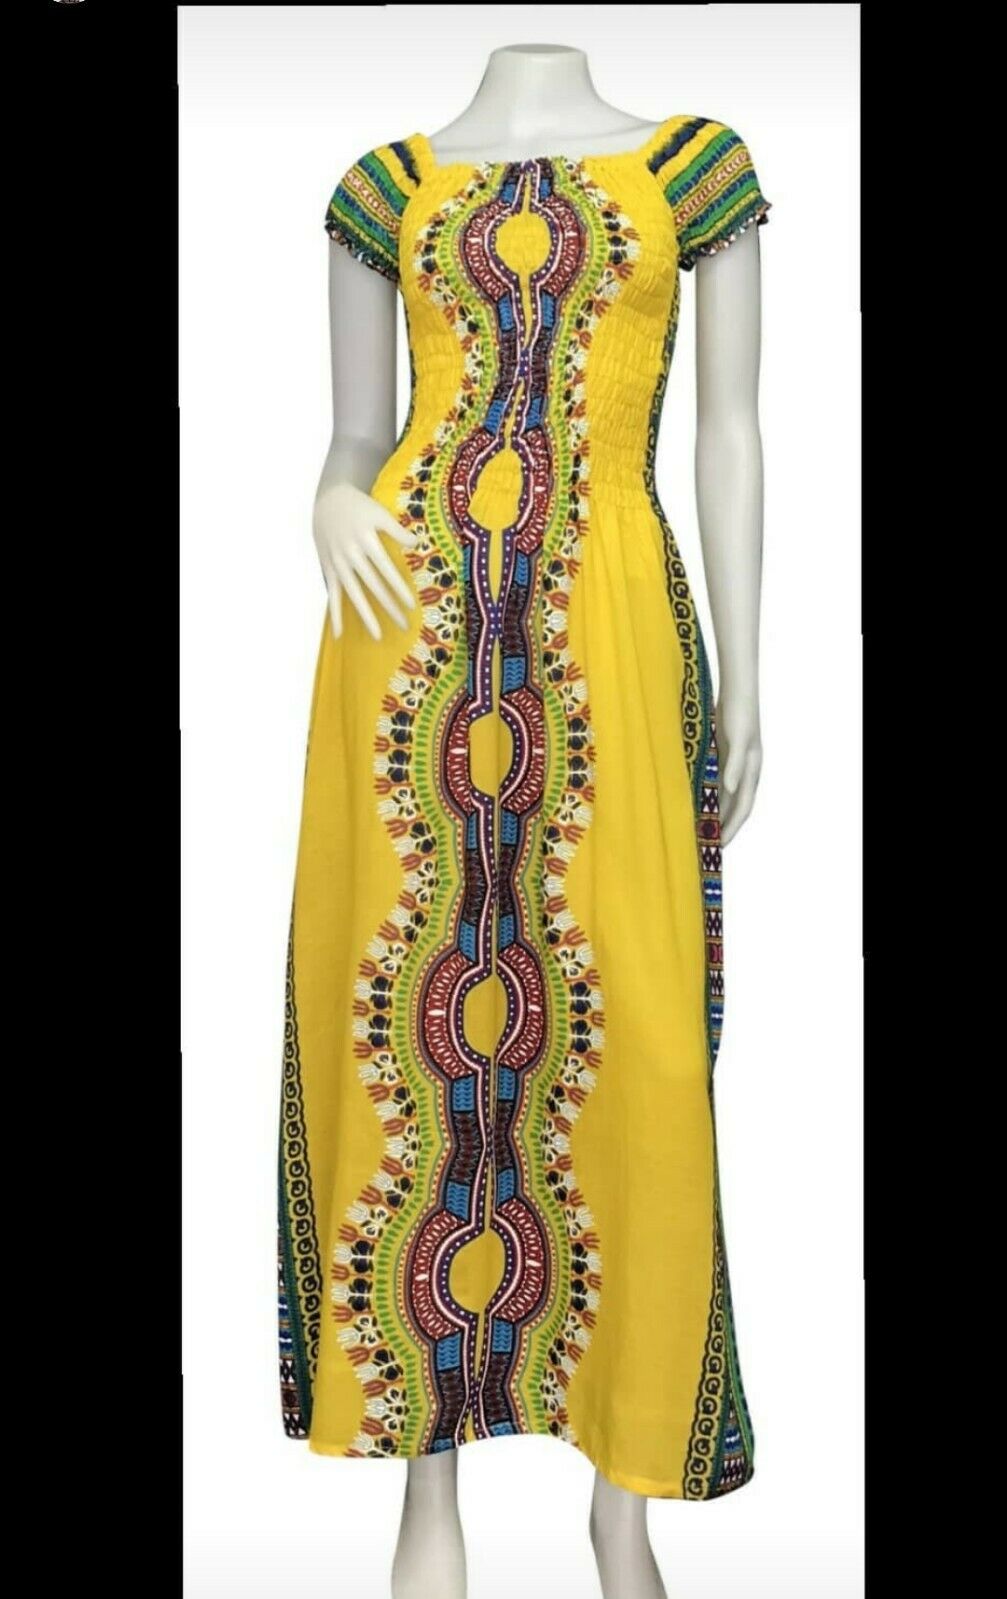 Traditional print long Maxi Boho yellow multicolored Dress one size fits